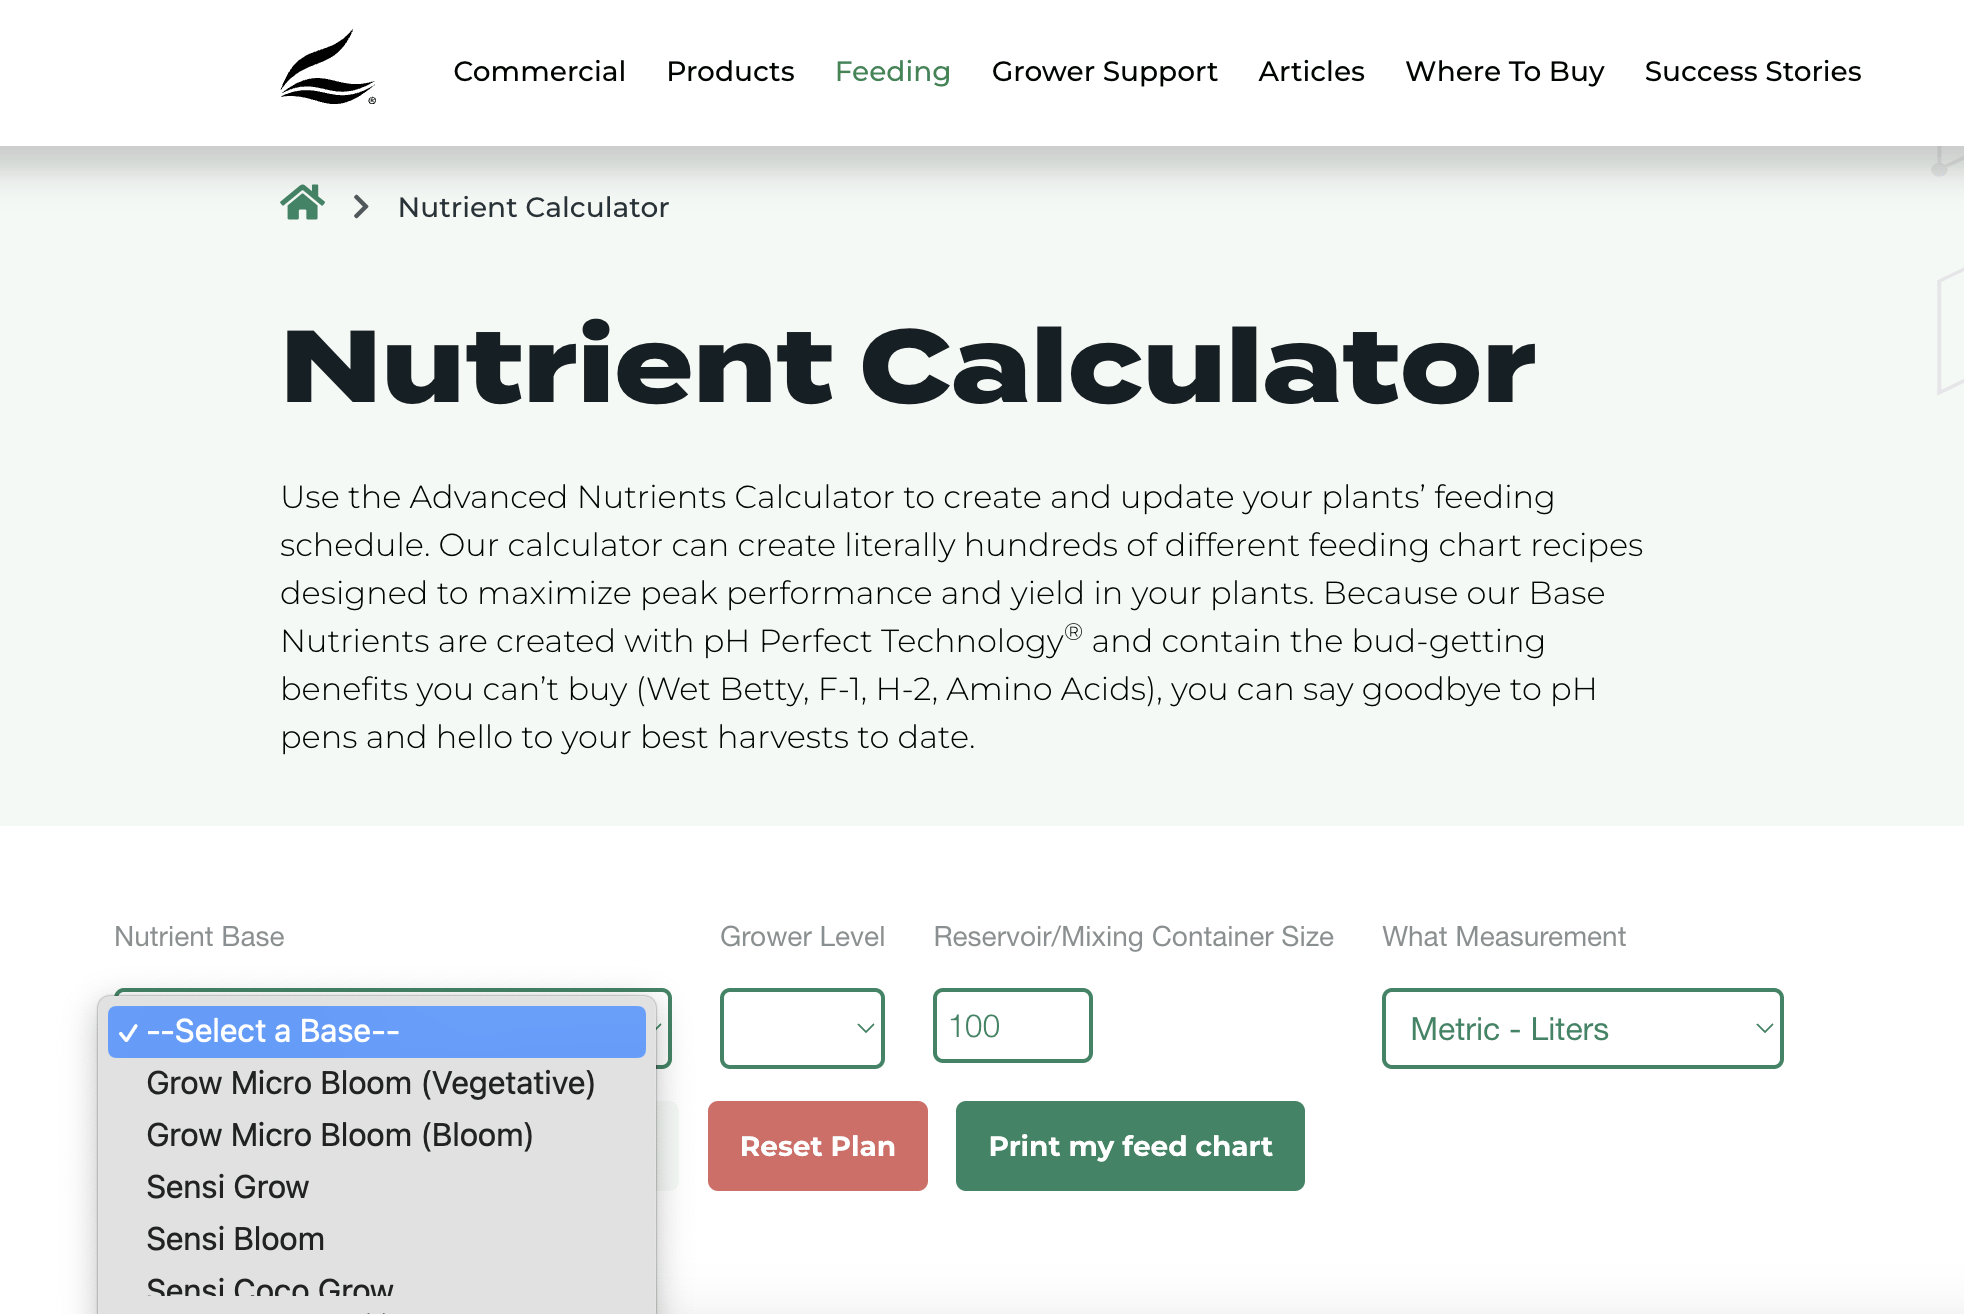 nutrient-calculator-base-selection-community.png